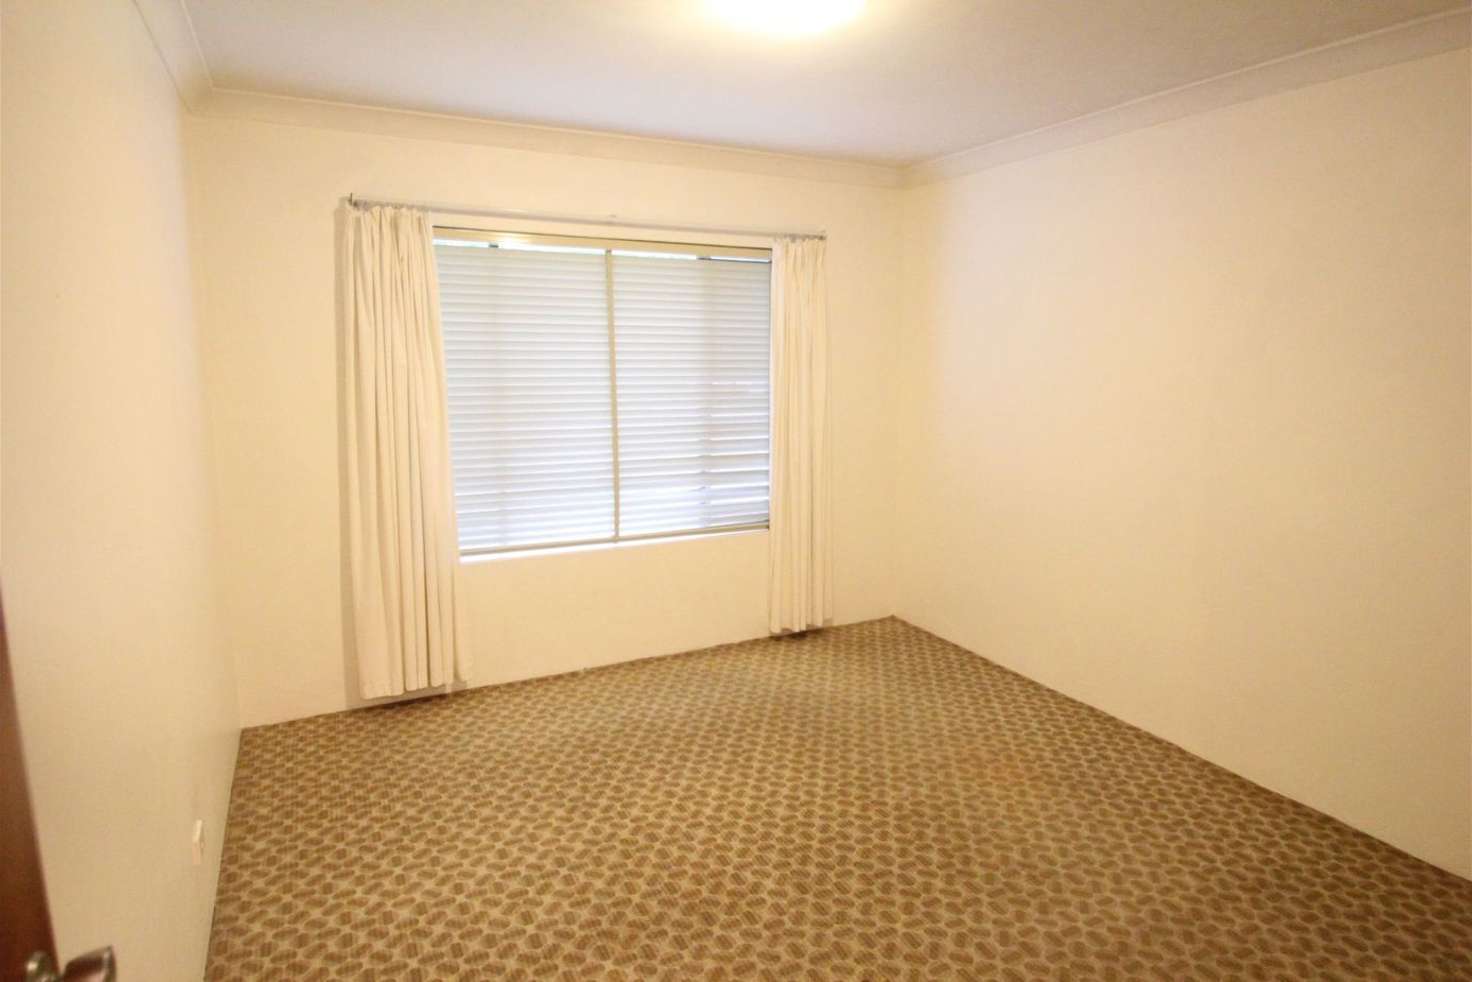 Main view of Homely apartment listing, 8/31 Galloway Street, North Parramatta NSW 2151